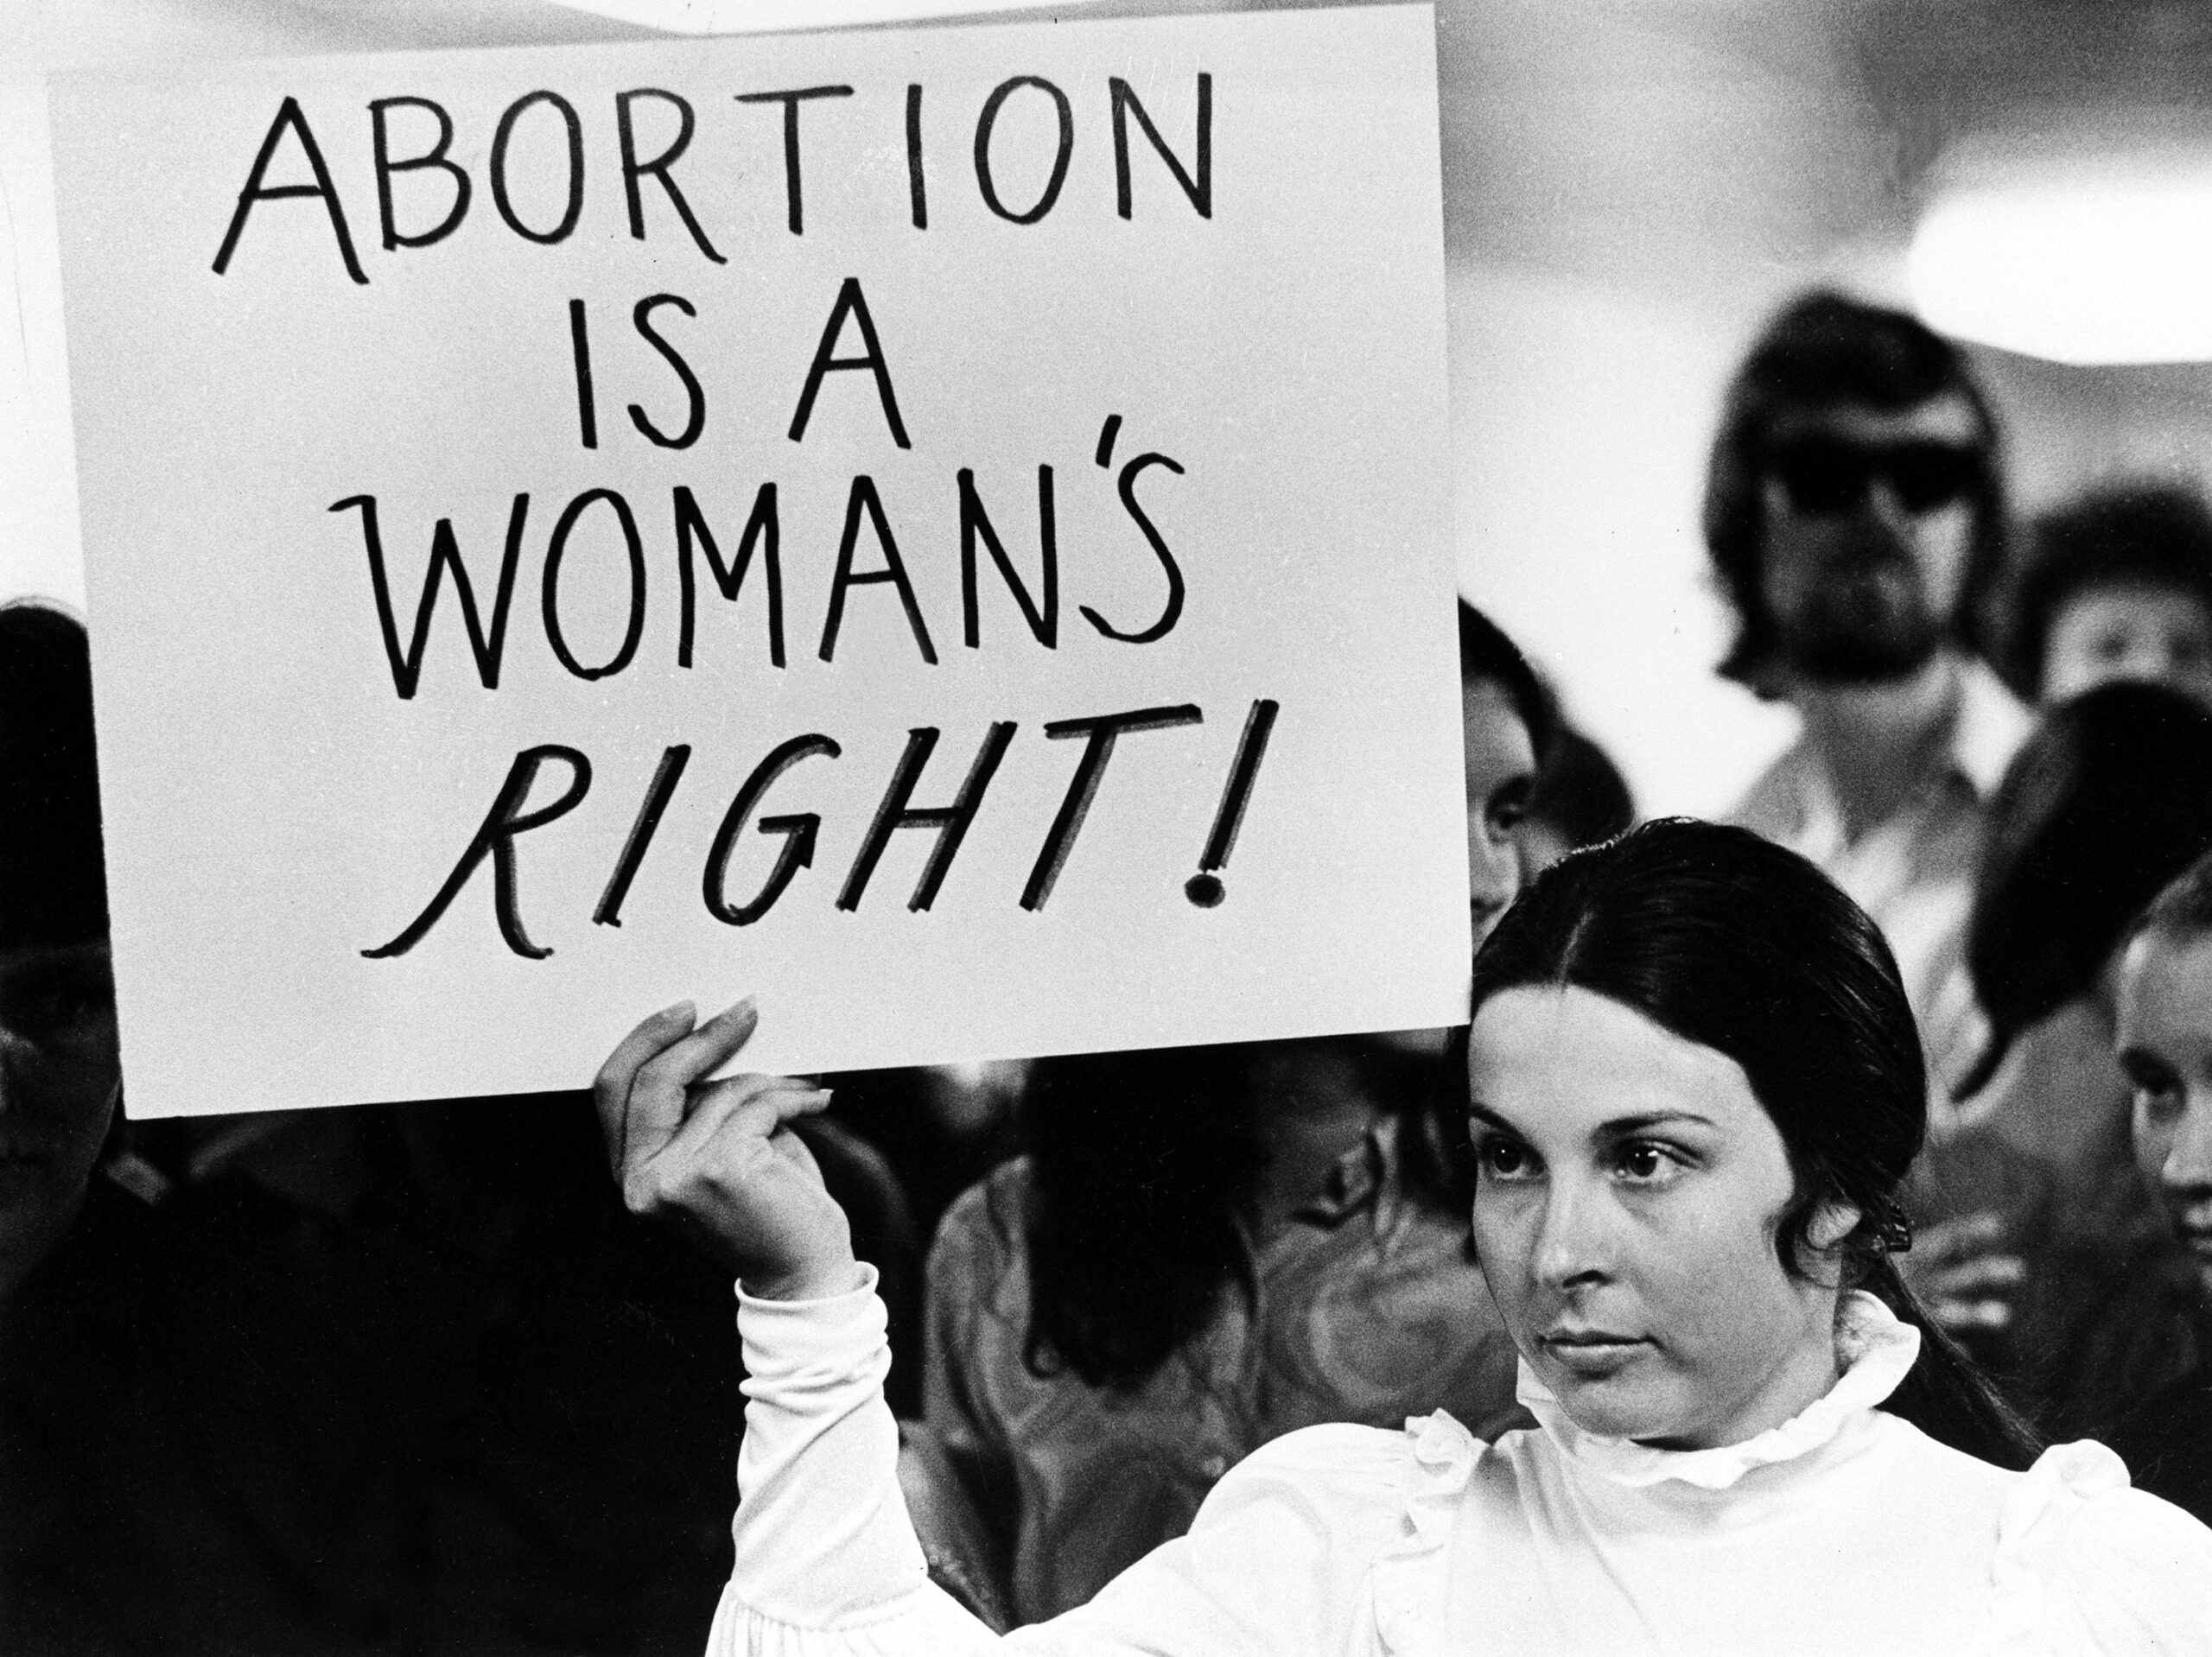 A young woman holds a sign demanding a woman's right to abortion at a demonstration to protest the closing of a Madison abortion clinic in Madison, Wis., April 20, 1971